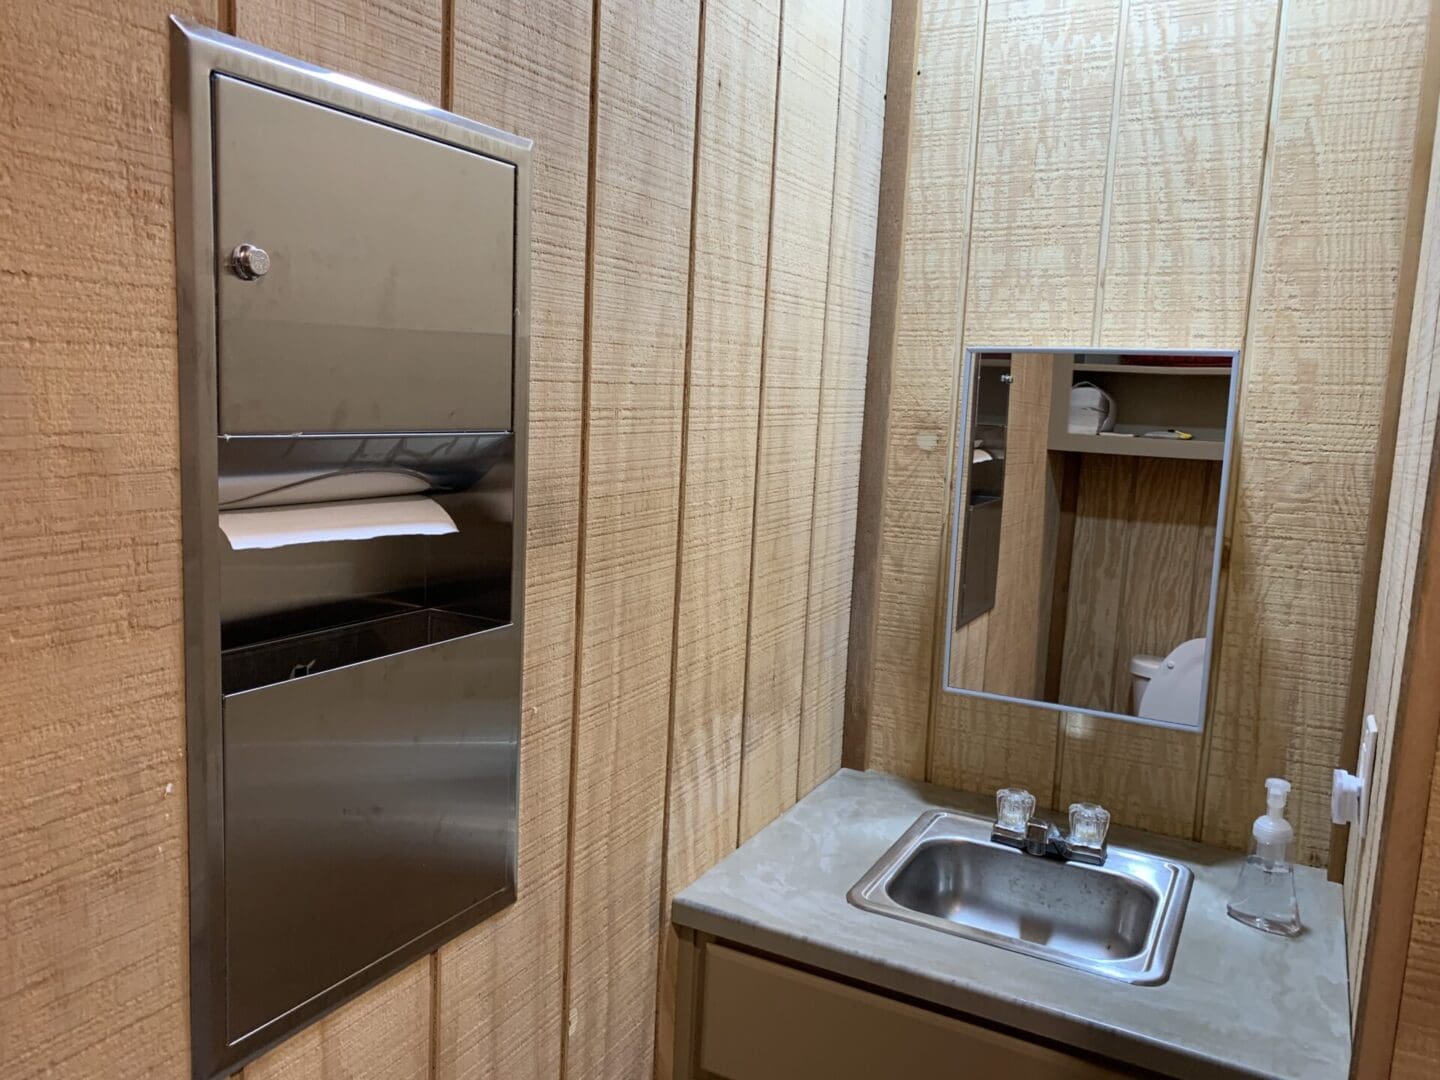 A bathroom with wood paneling and stainless steel sink.